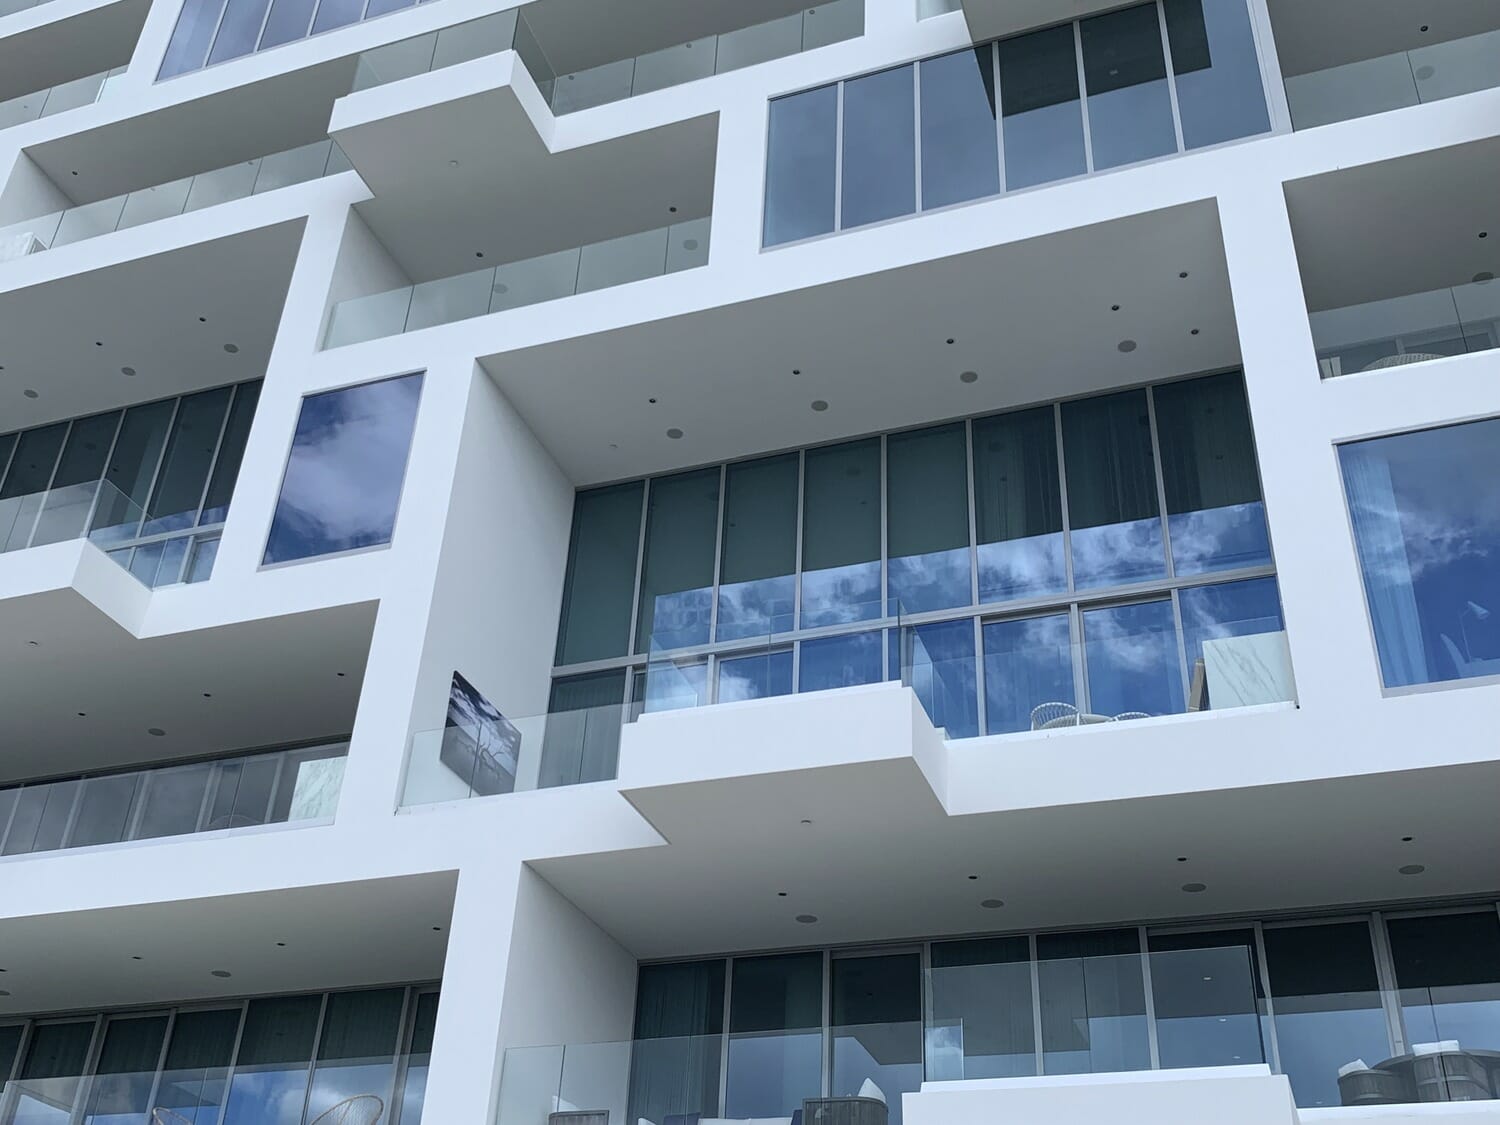 3d rendering of a white building with balconies and windows.